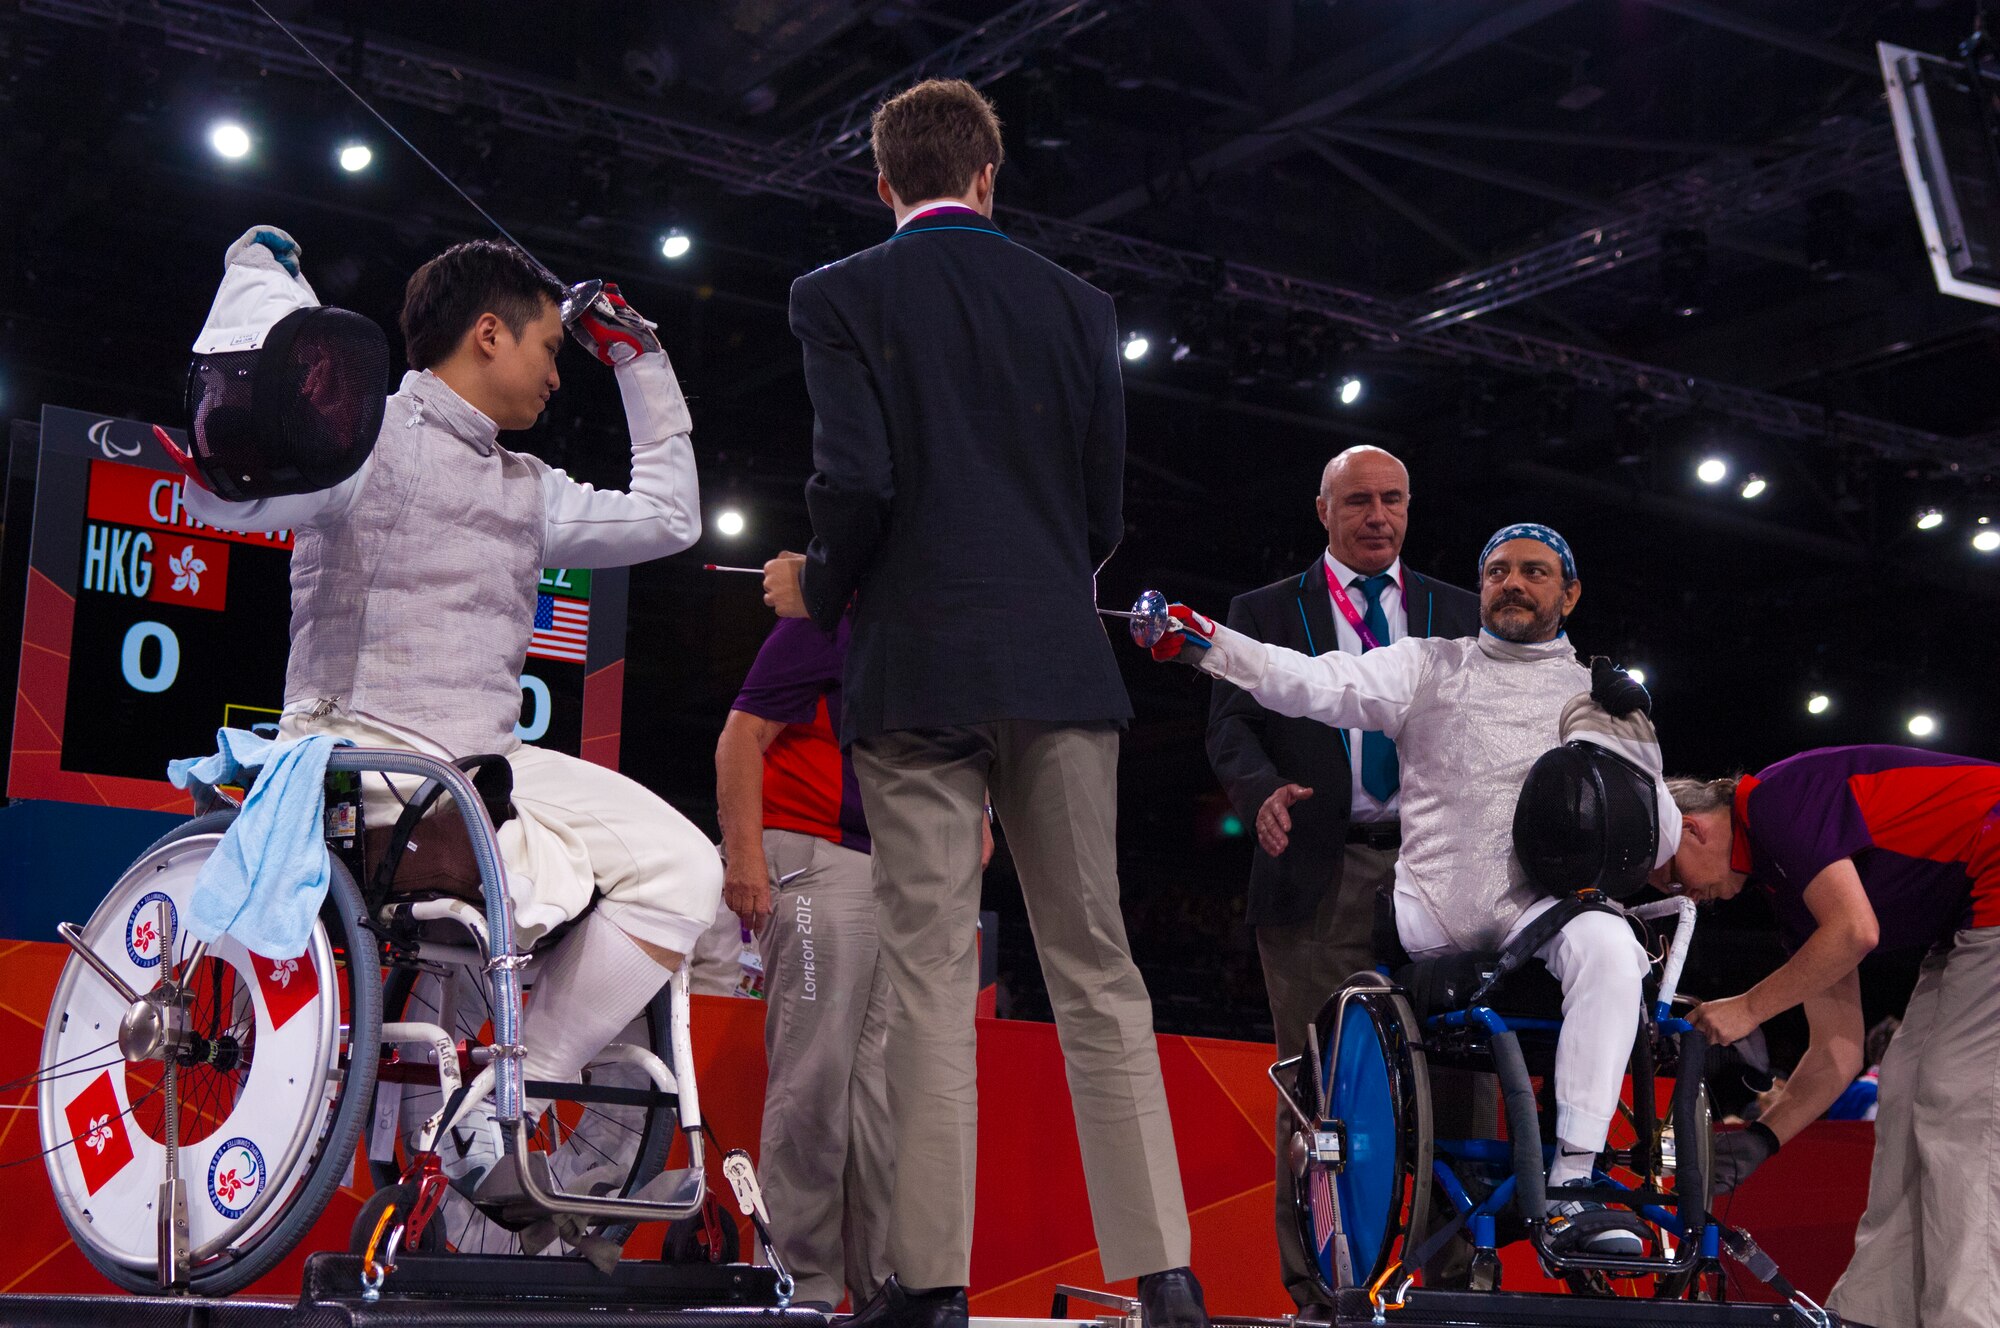 Former Air Force Staff Sgt. Mario Rodriguez, right, a member of the 2012 U.S. Paralympic fencing team, prepares to enter a bout with Wing Kin Chan of Hong Kong as officials measure the distance between the two athletes at London's ExCel Centre during the Paralympic Games, Sept. 4, 2012. (DOD photo/Sgt. 1st Class Tyrone C. Marshall Jr.)  
